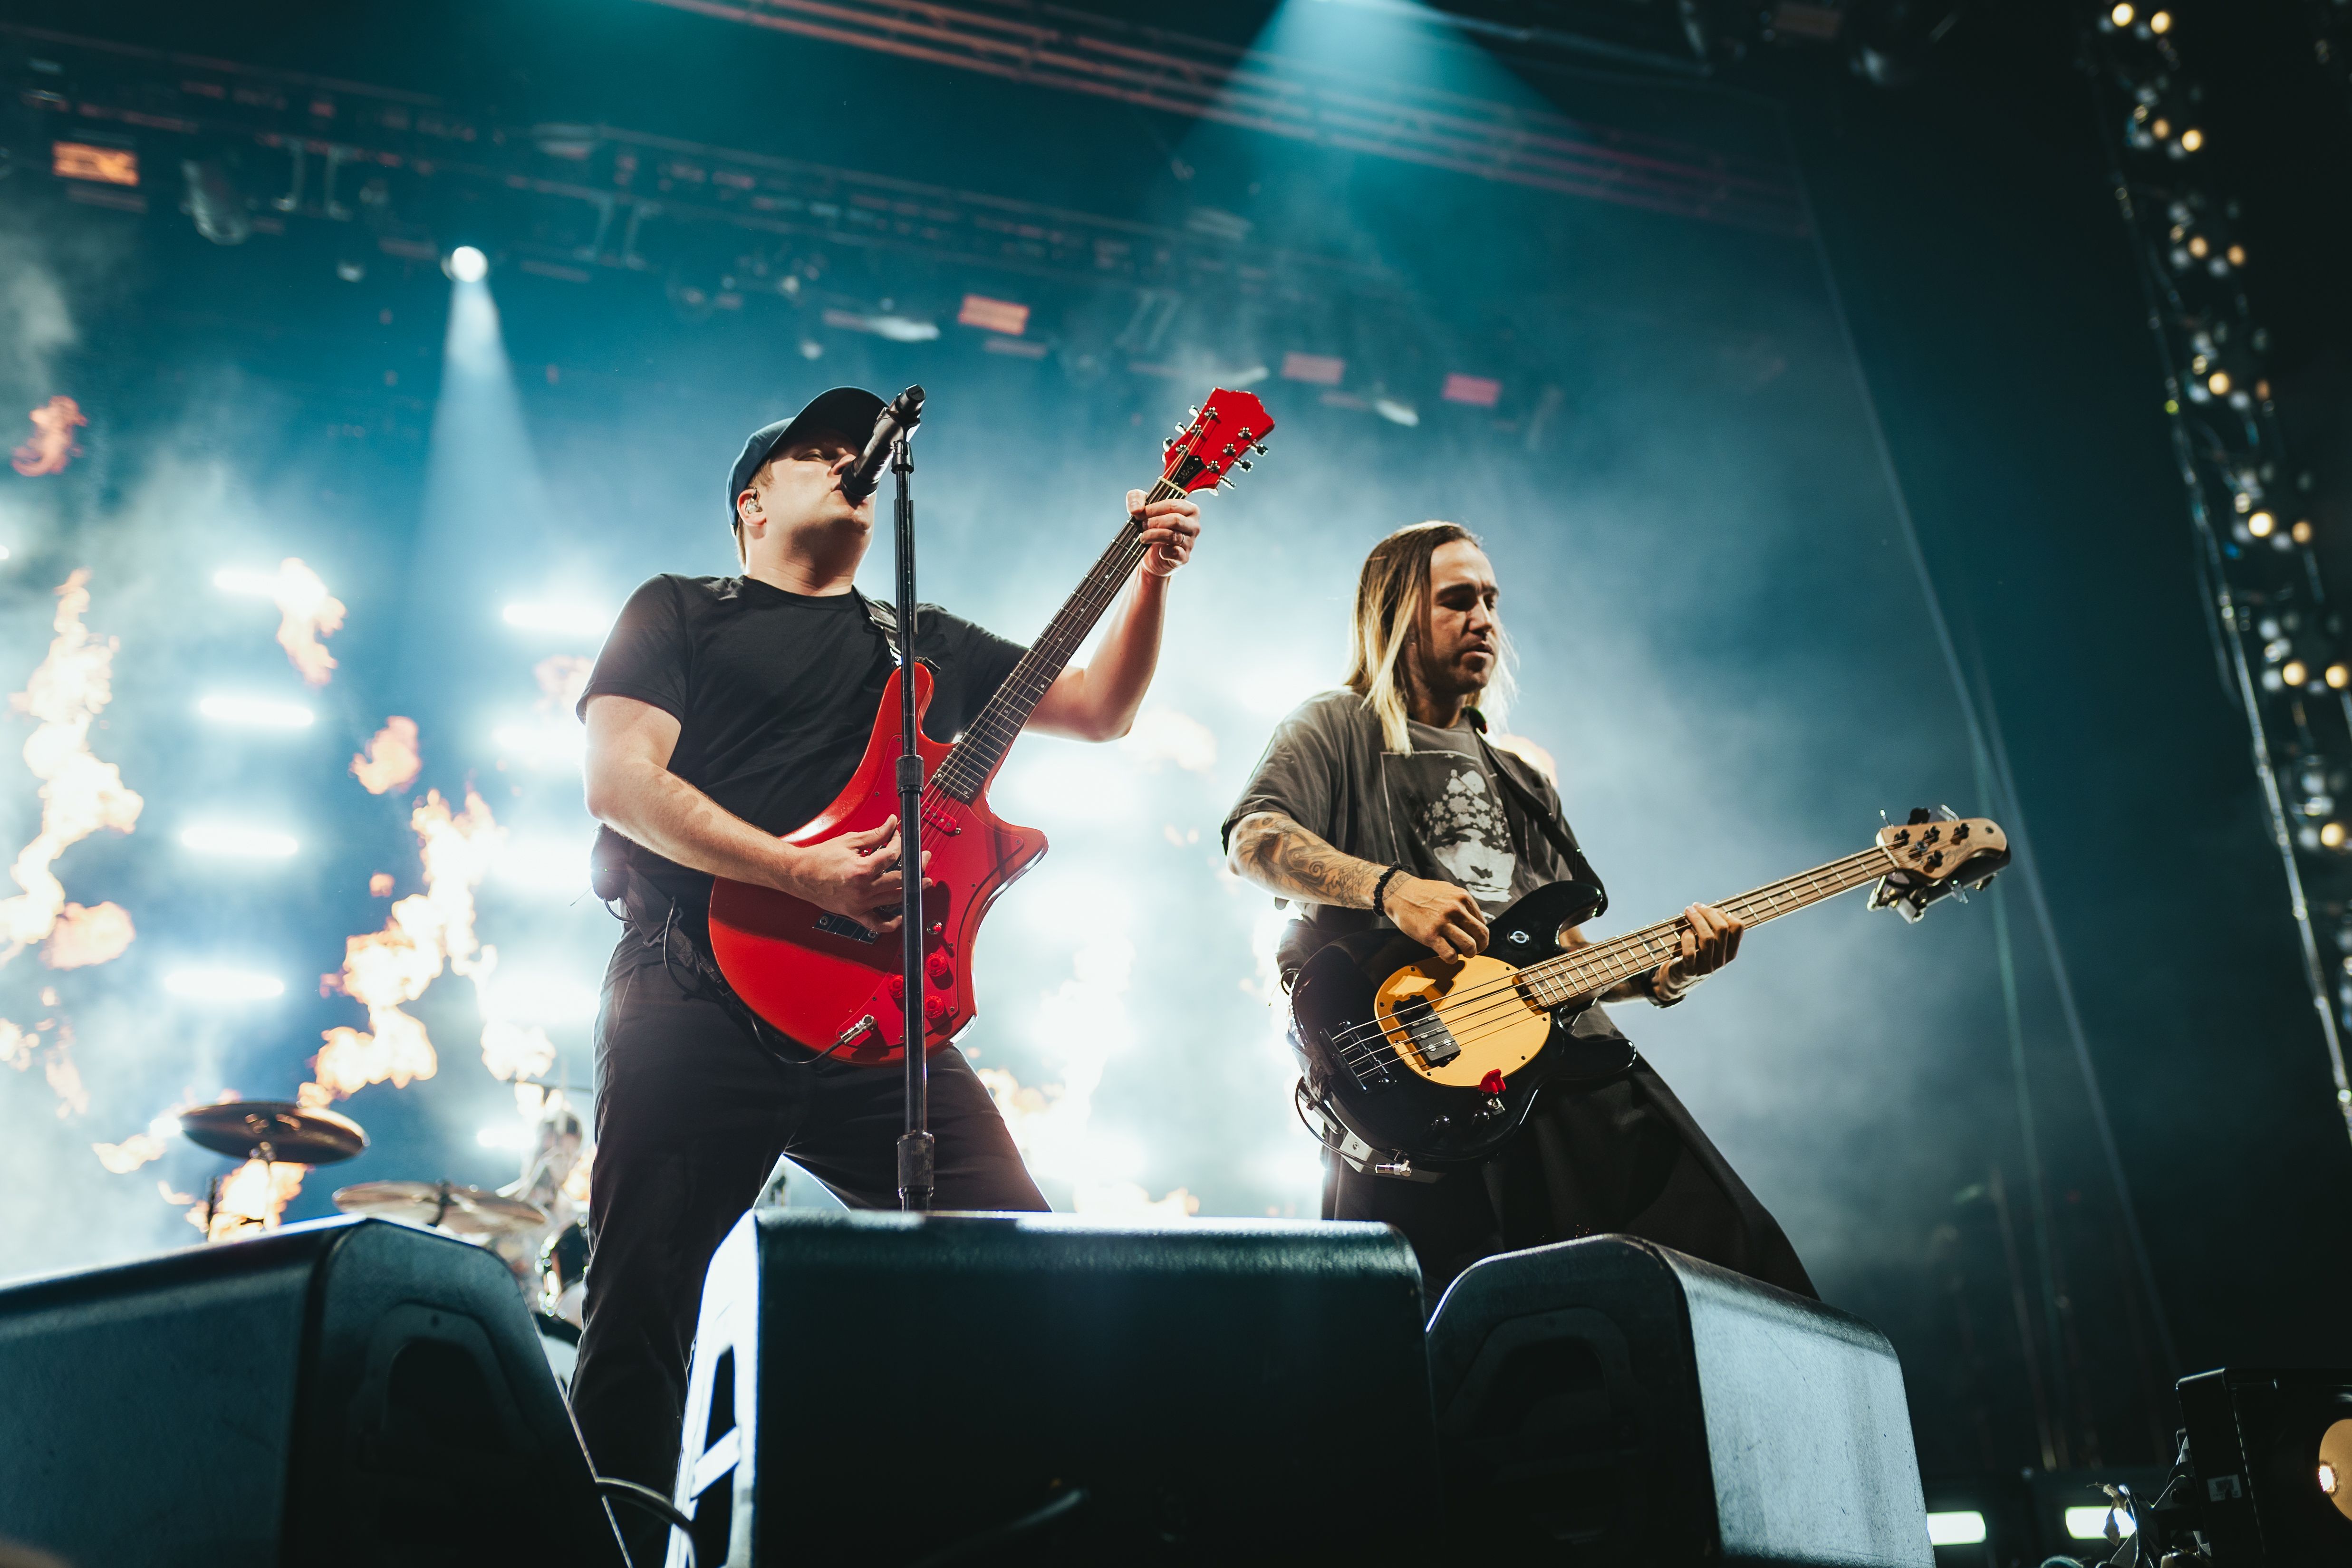 Fall Out Boy brings the heat to Bristow, VA